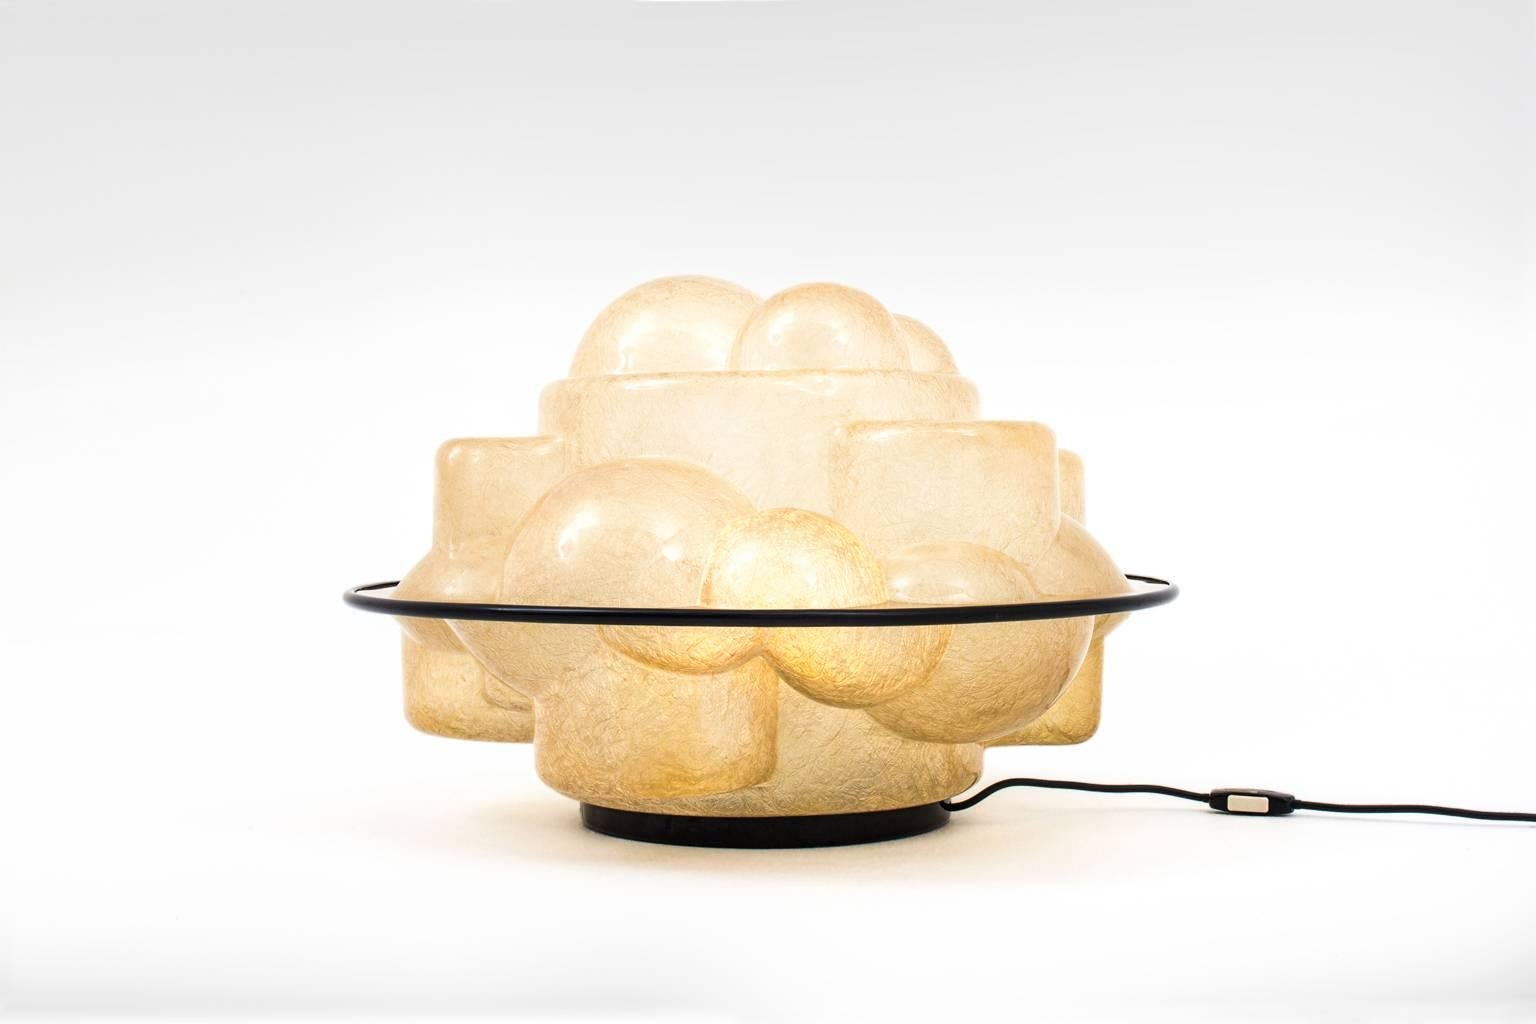 Profiterole lamp by Sergio Asti for Martinelli Luce, Italy, 1968. Very distinctive design made out of fiberglass with a beautiful warm golden honey color when lit.
The name 'Profiterole' refers to puffy voluptuous shape. Provided with one E-27